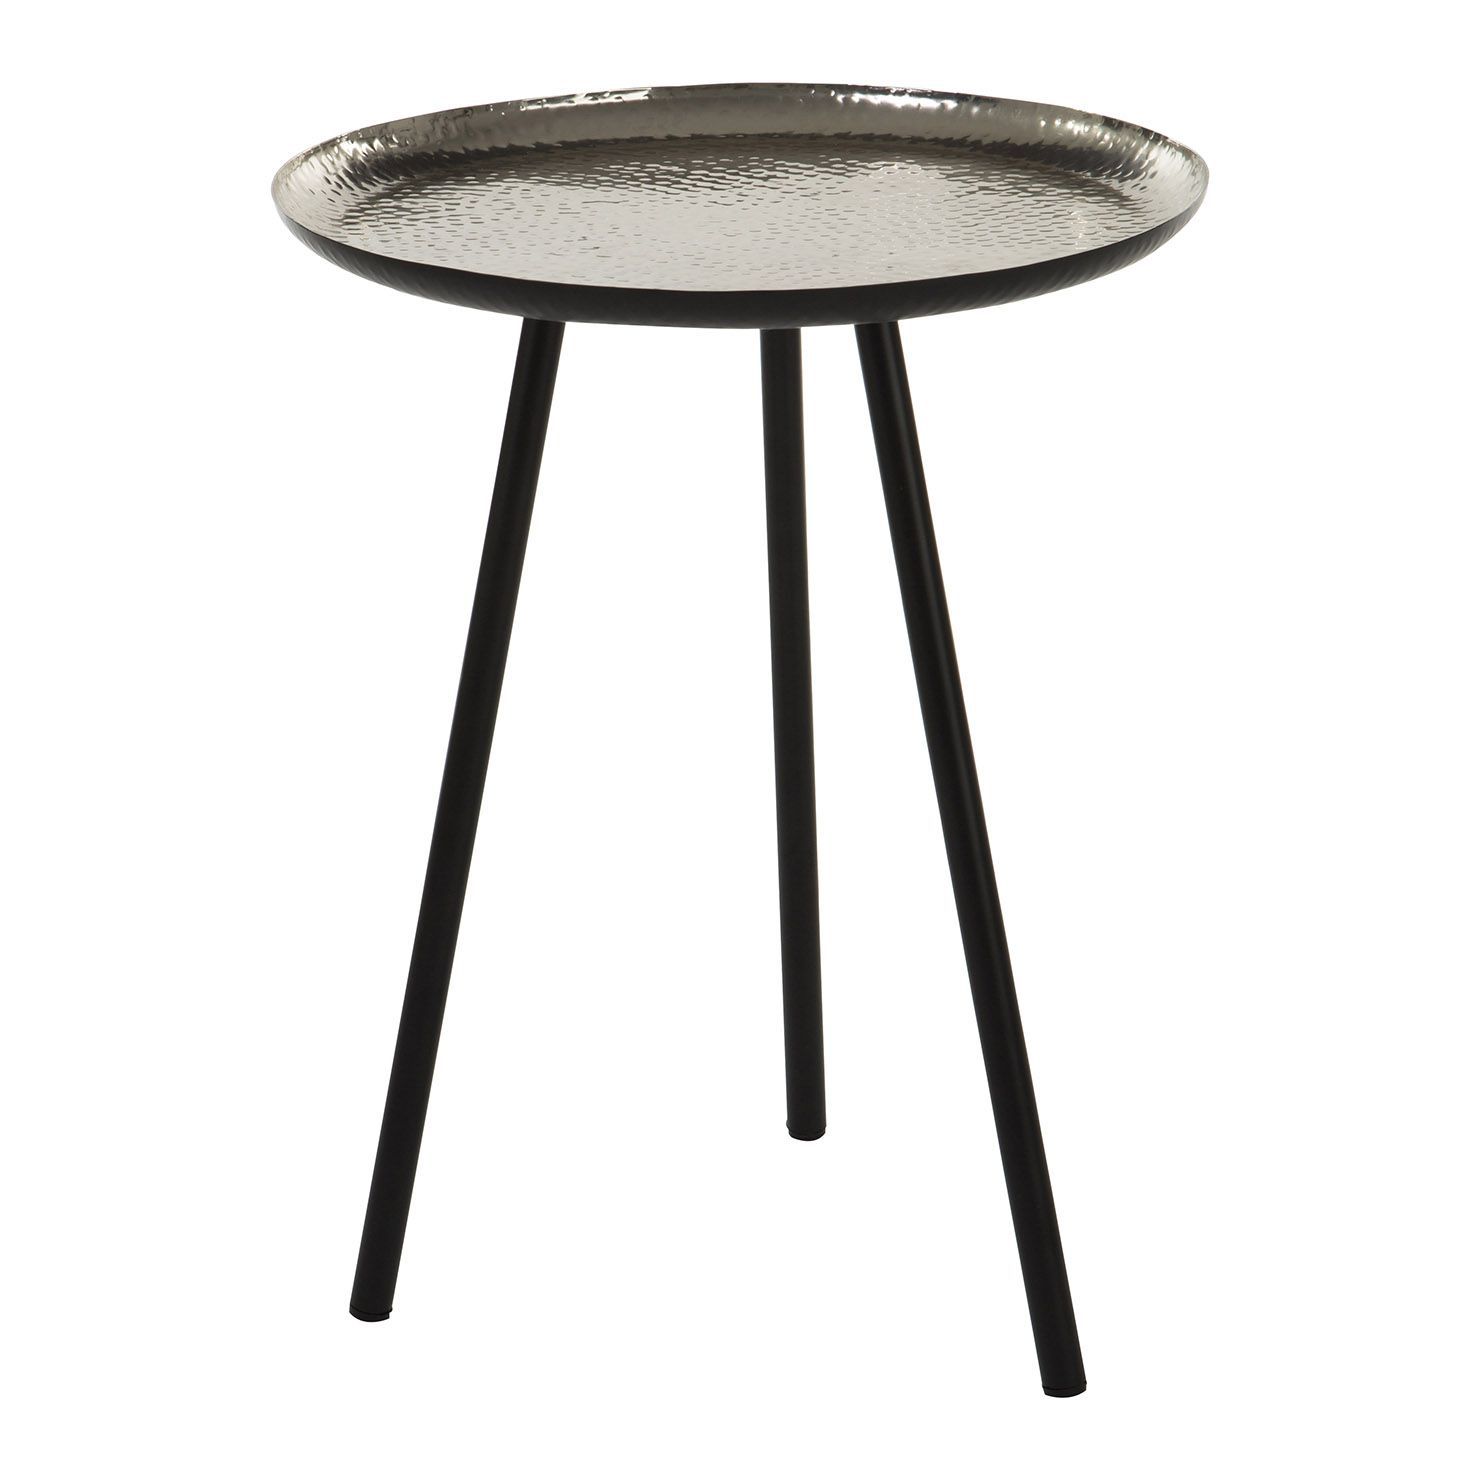 Round Metal Side Table | Achica | Side Table, Round Metal Side Table, Table Pertaining To Metal Side Tables For Living Spaces (Gallery 8 of 20)